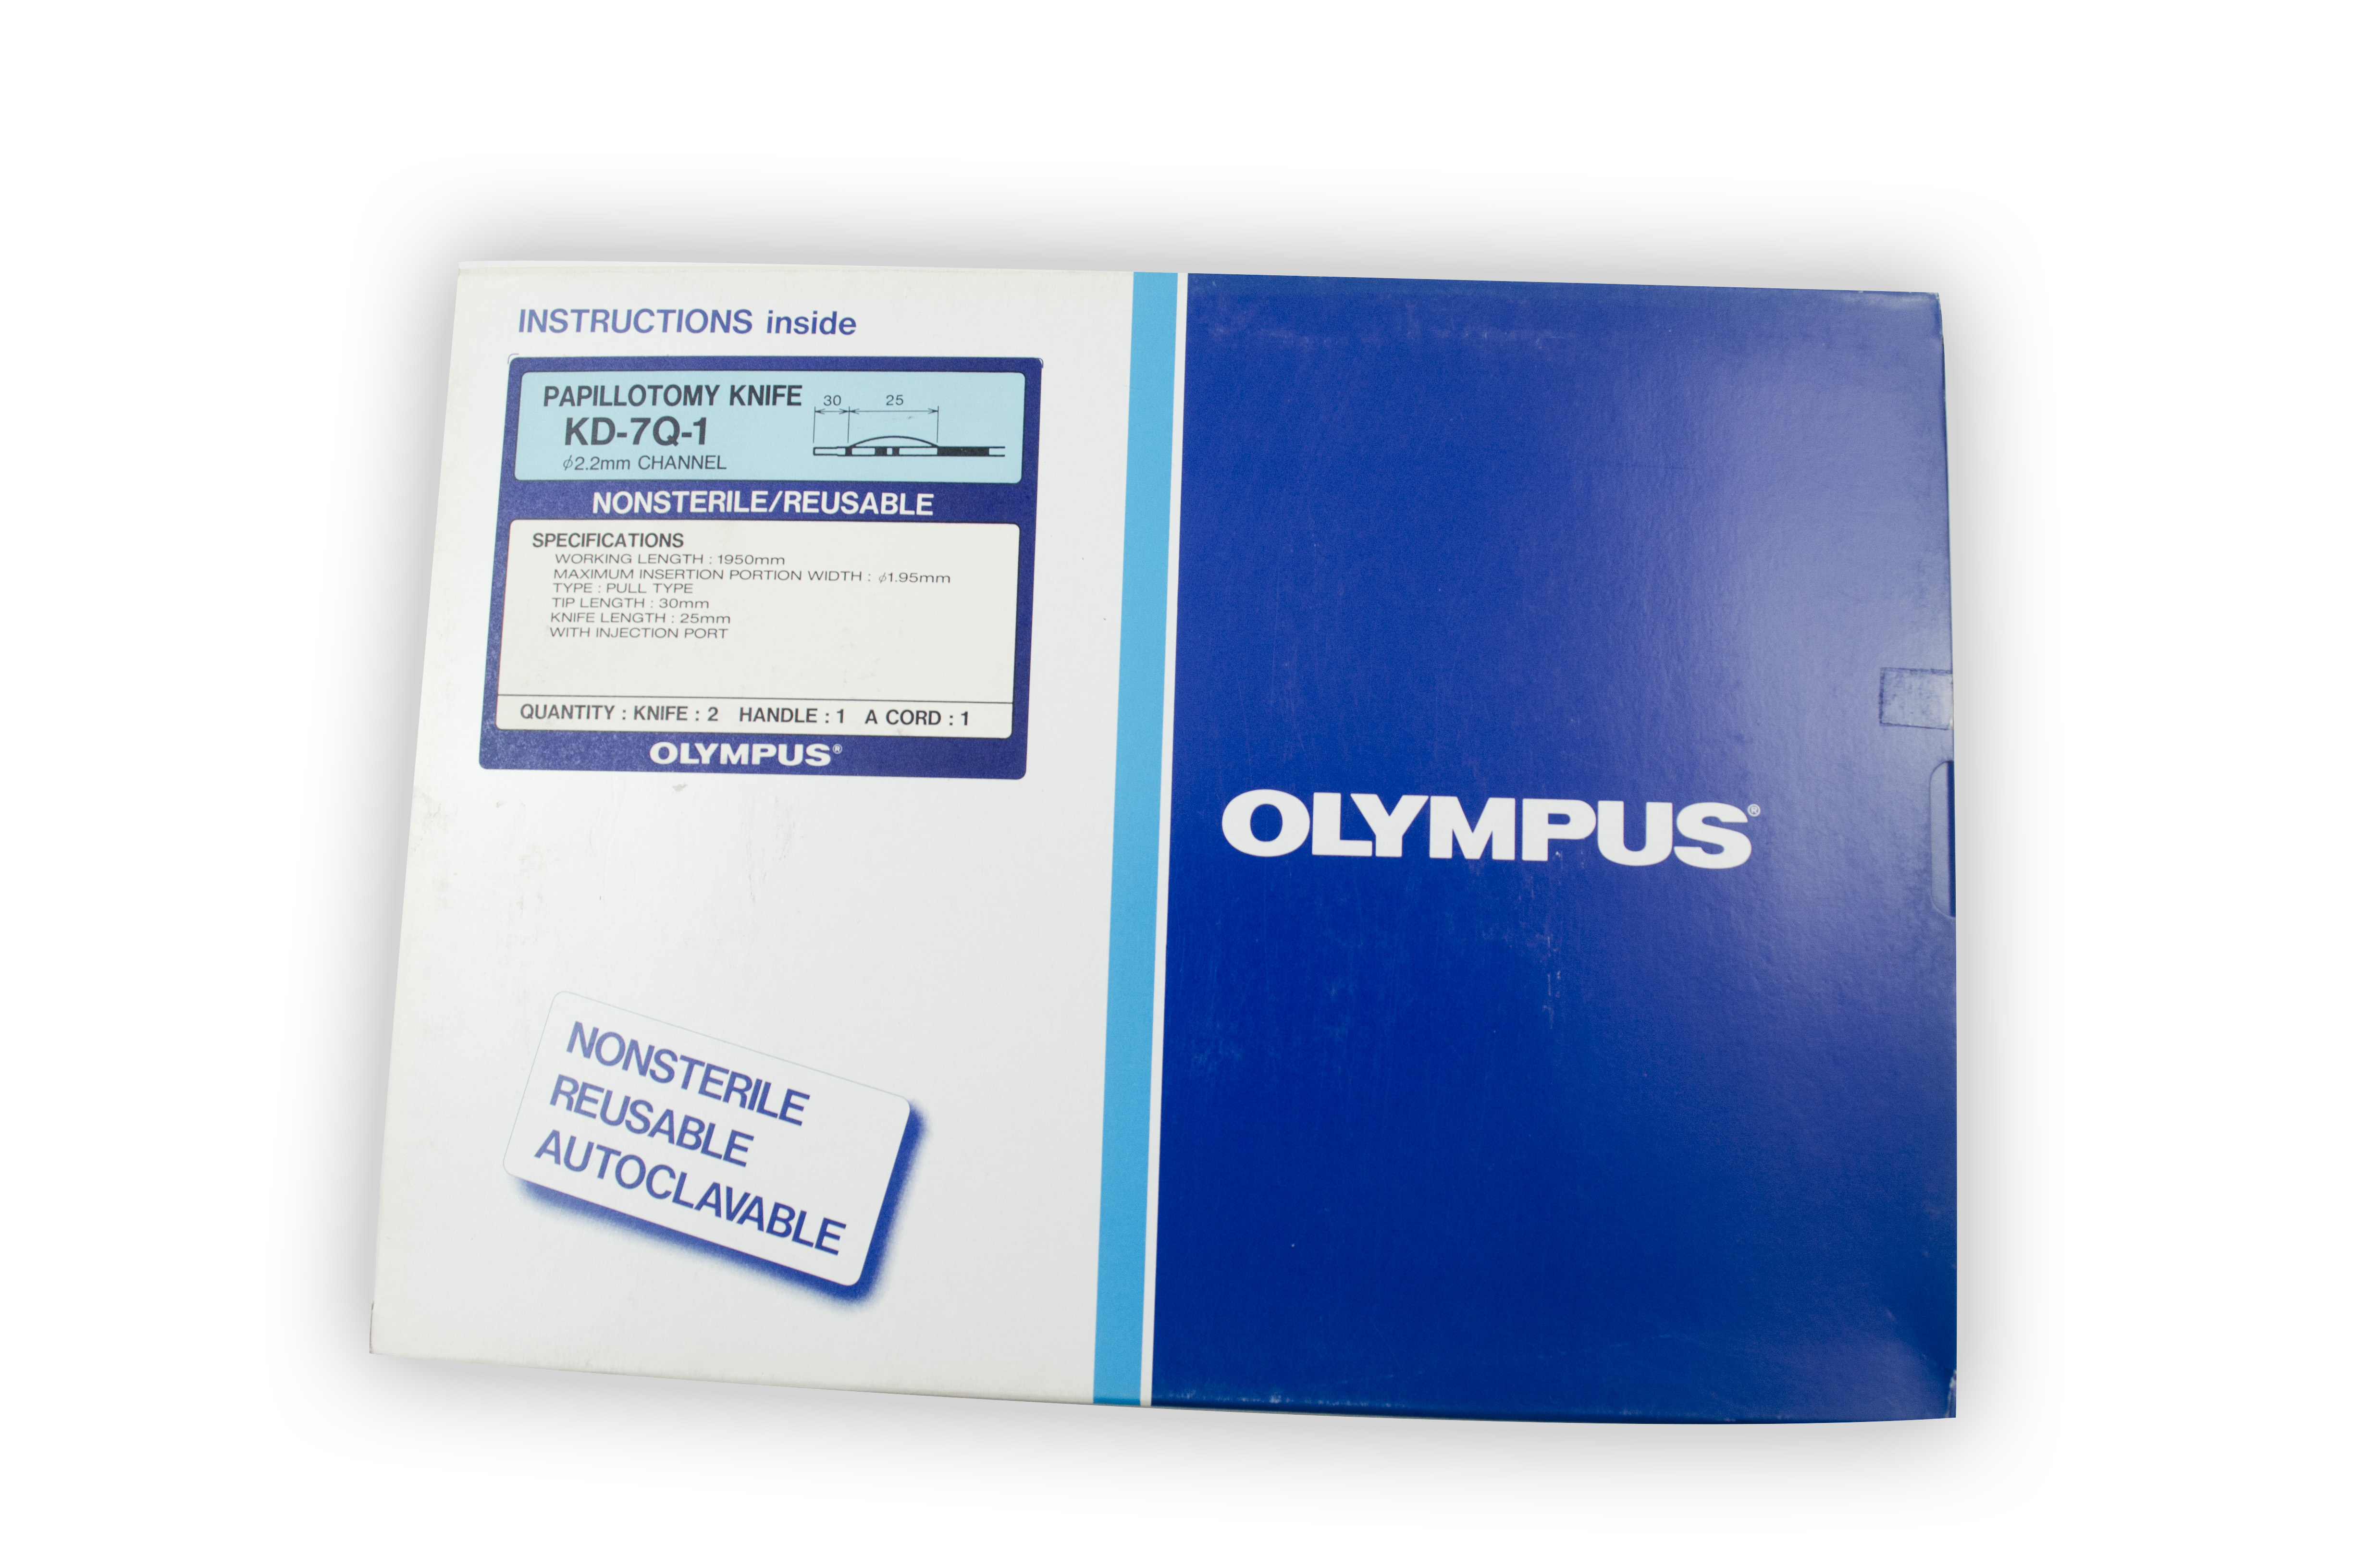 Olympus Reusable Sphincterotome - KD-7Q-1 (Set of 2 Knives, 1 Handle, 1 A Cord)